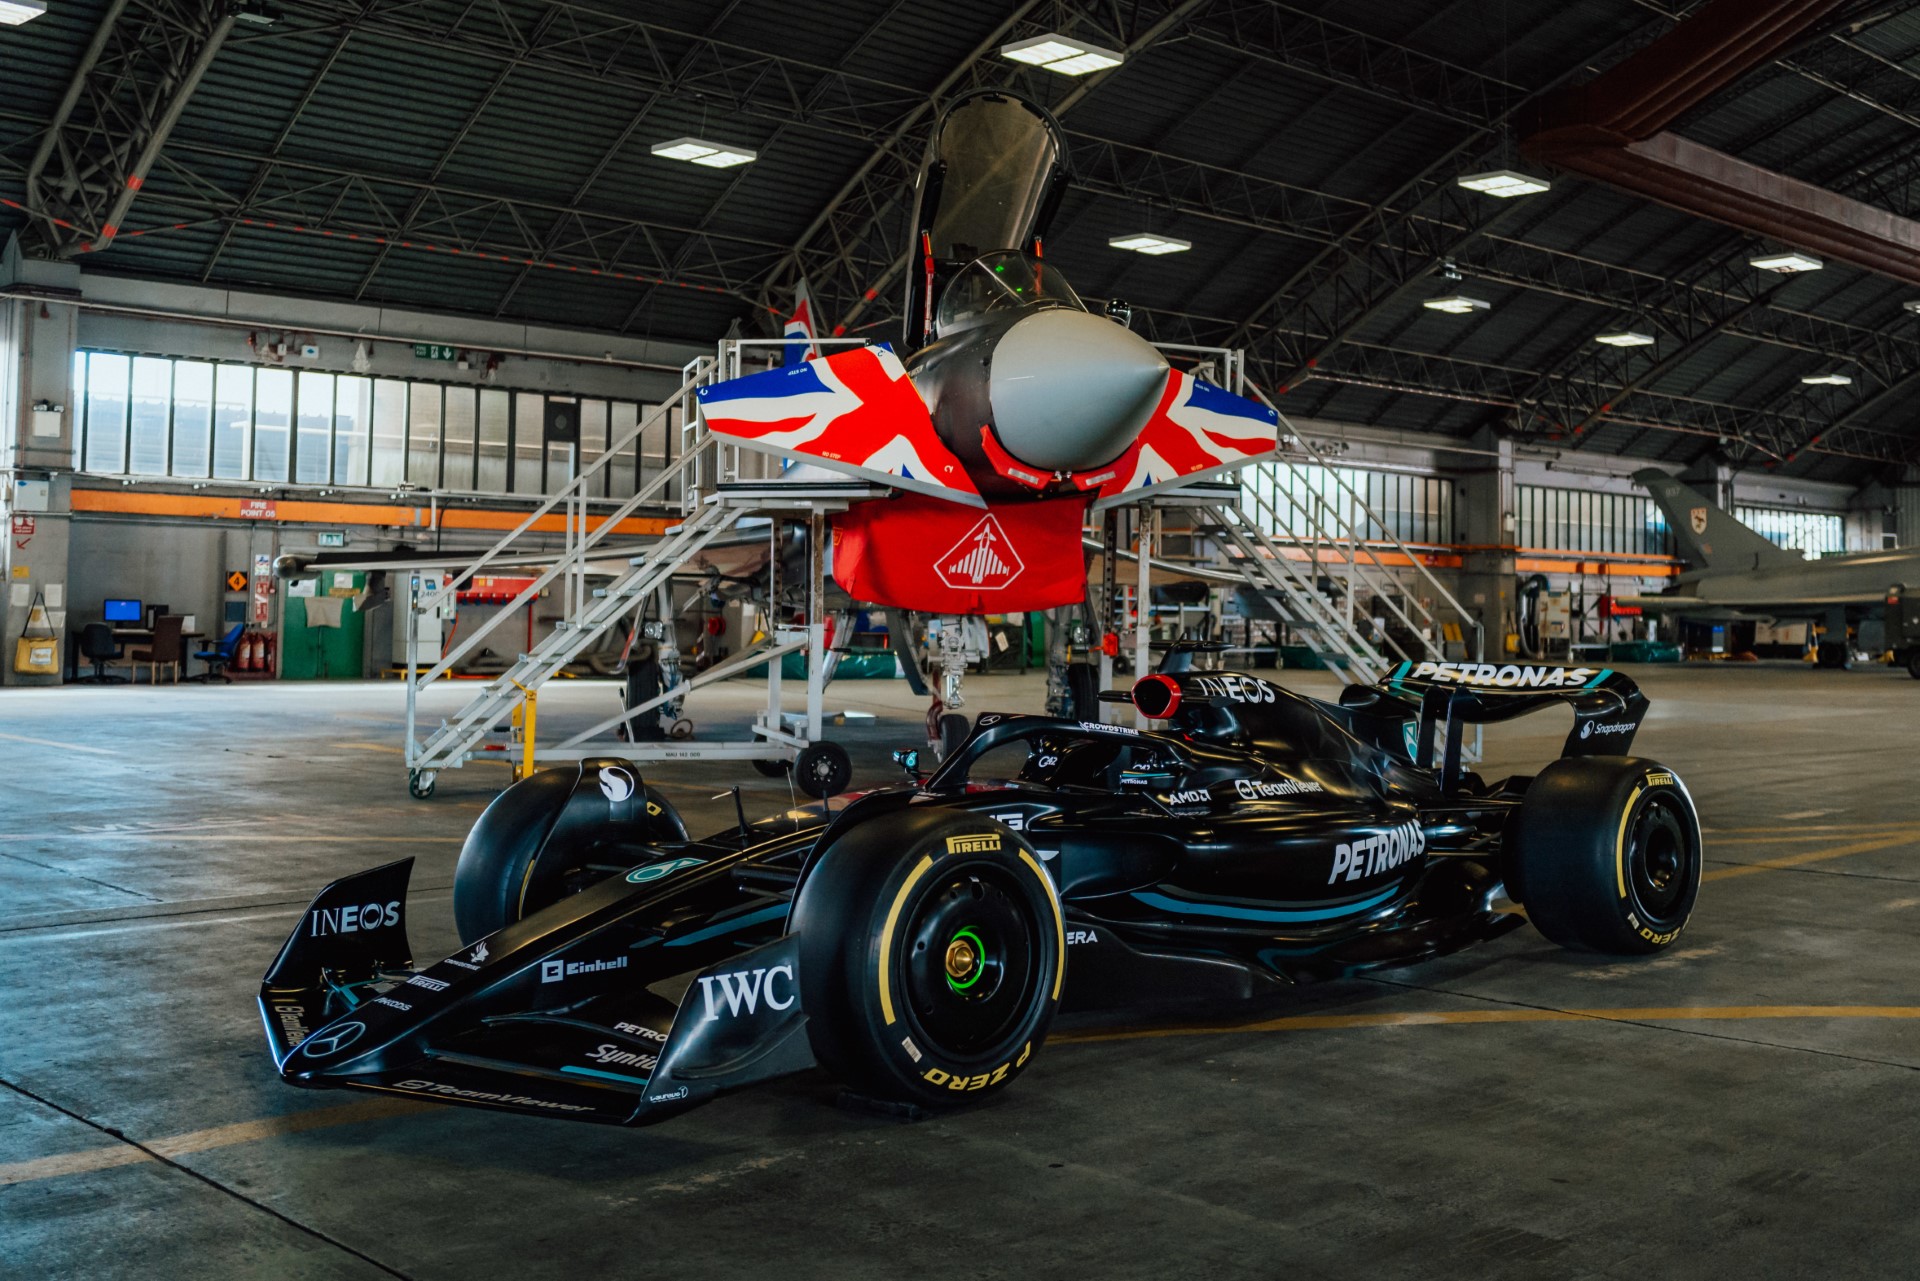 F1 Car pictured in front of RAF Typhoon